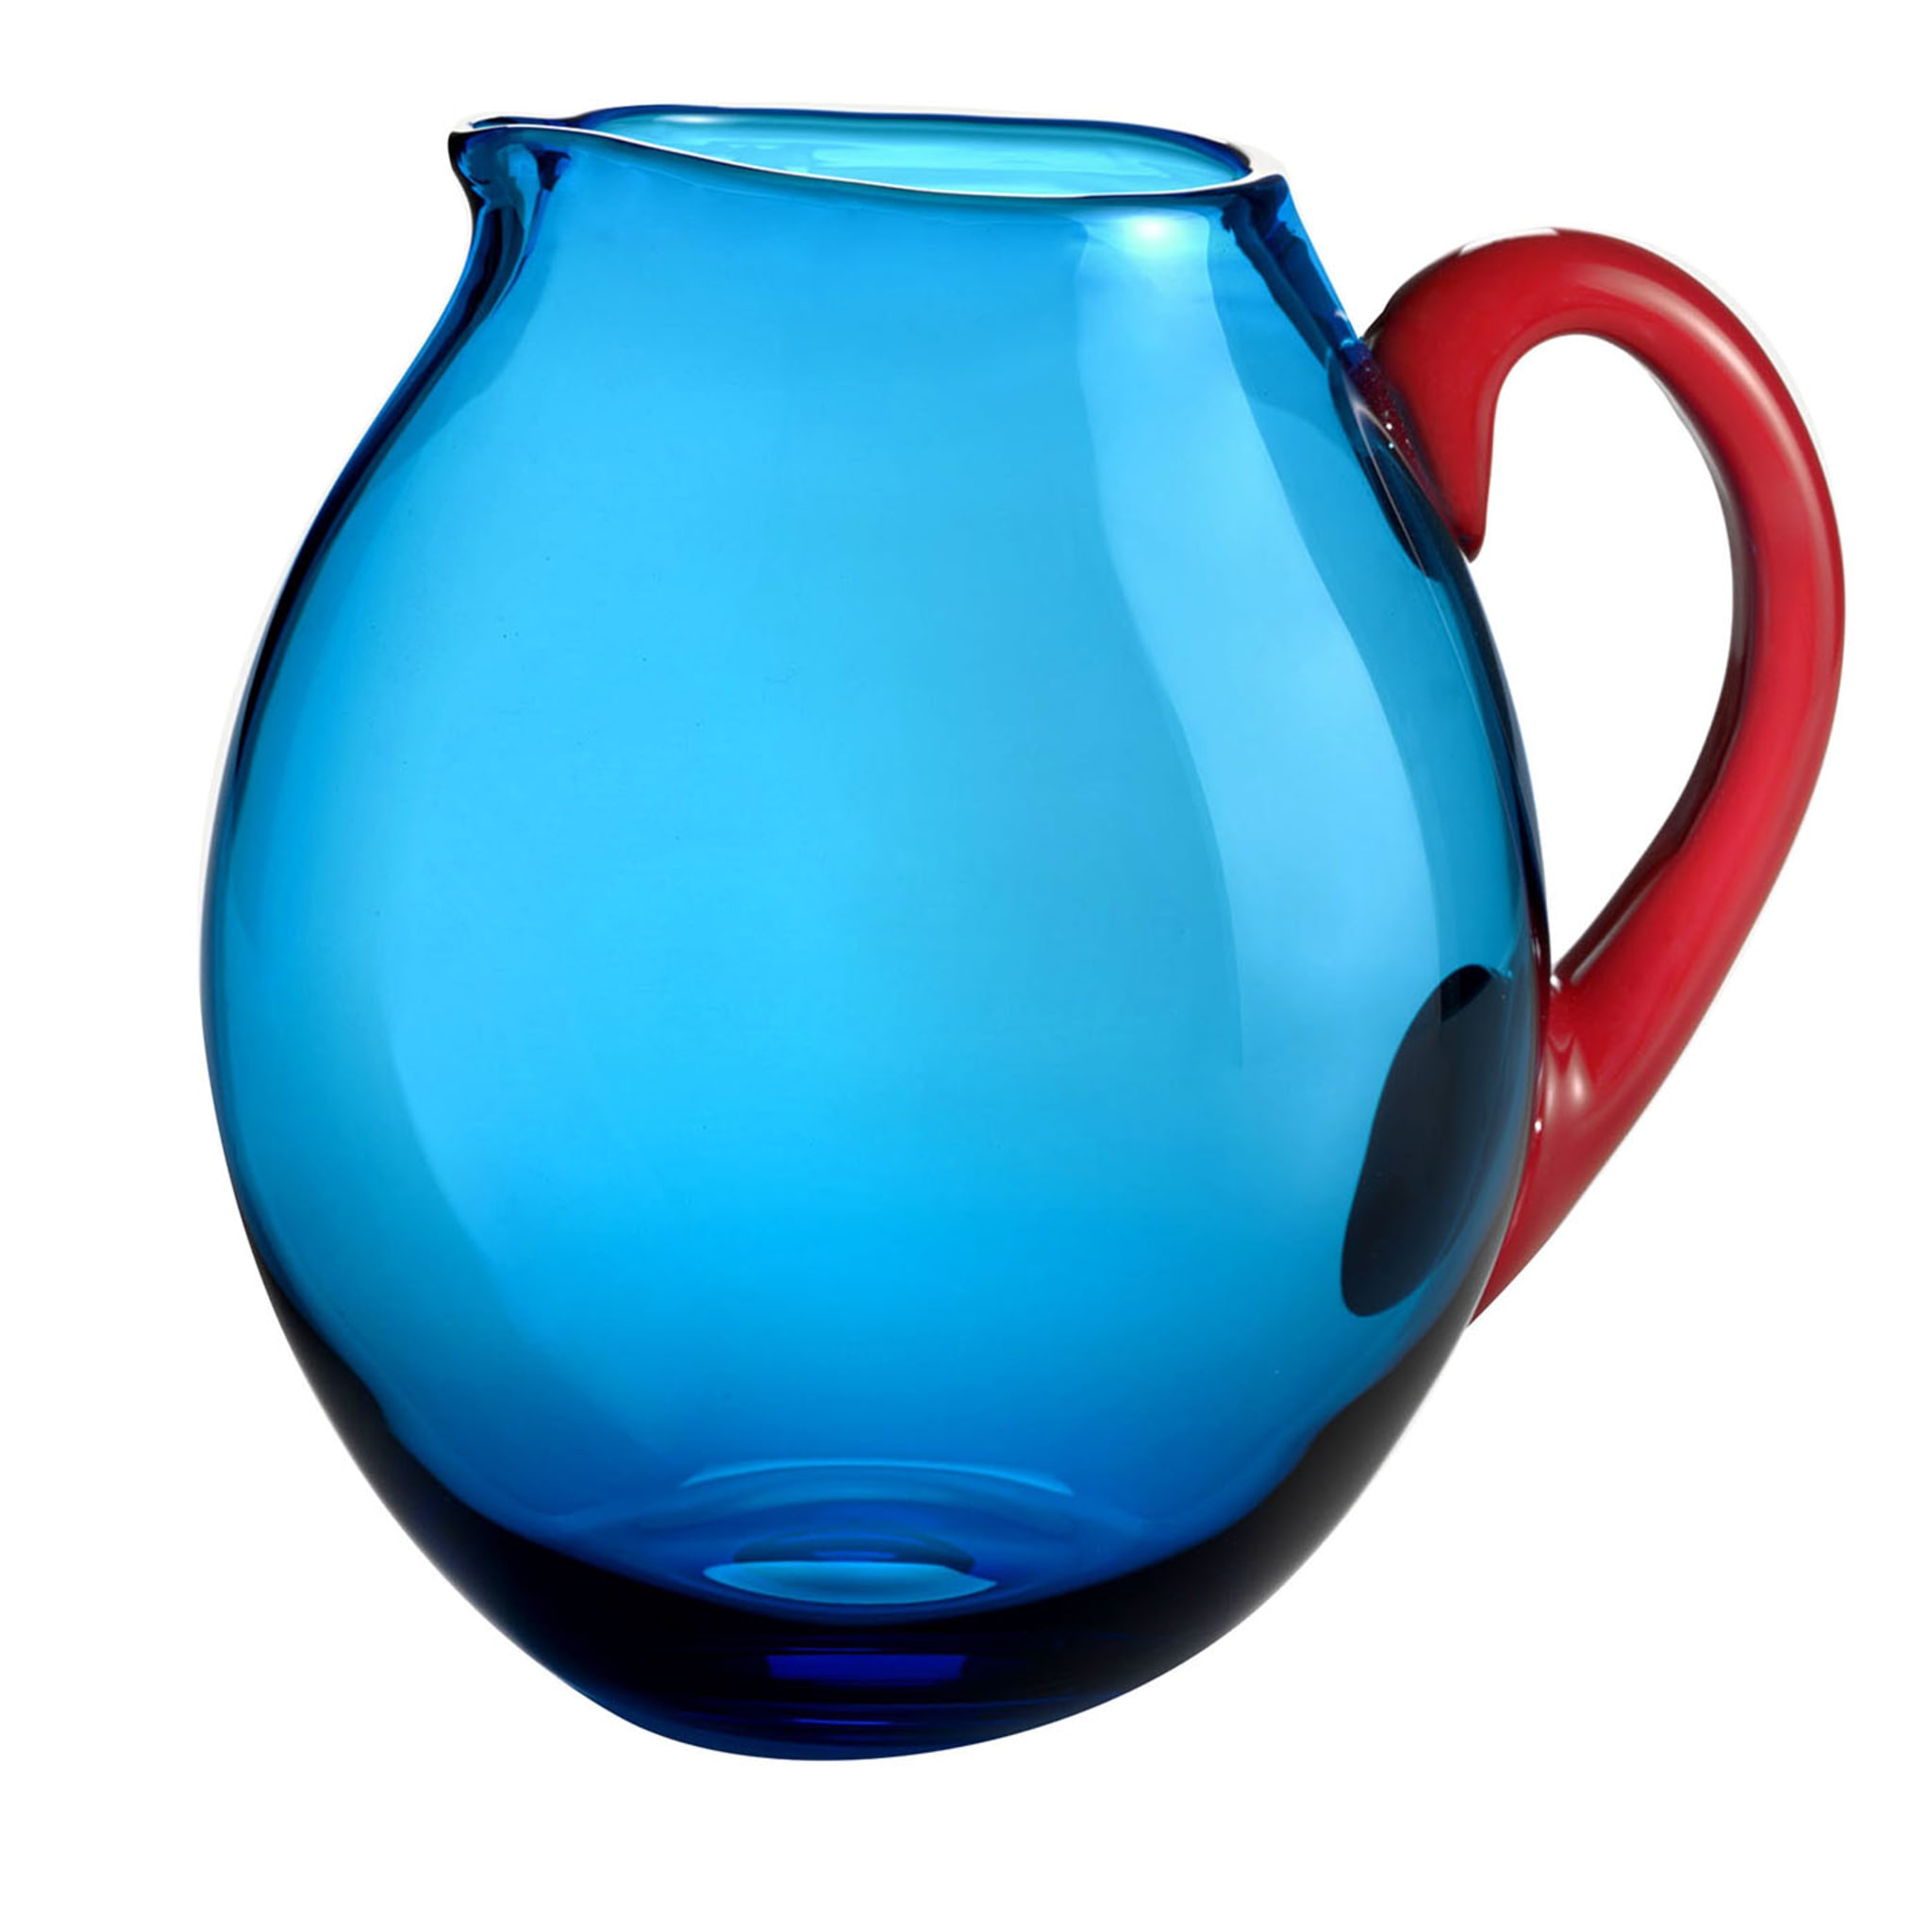 Dandy Coral & Blue Pitcher by Stefano Marcato - Main view